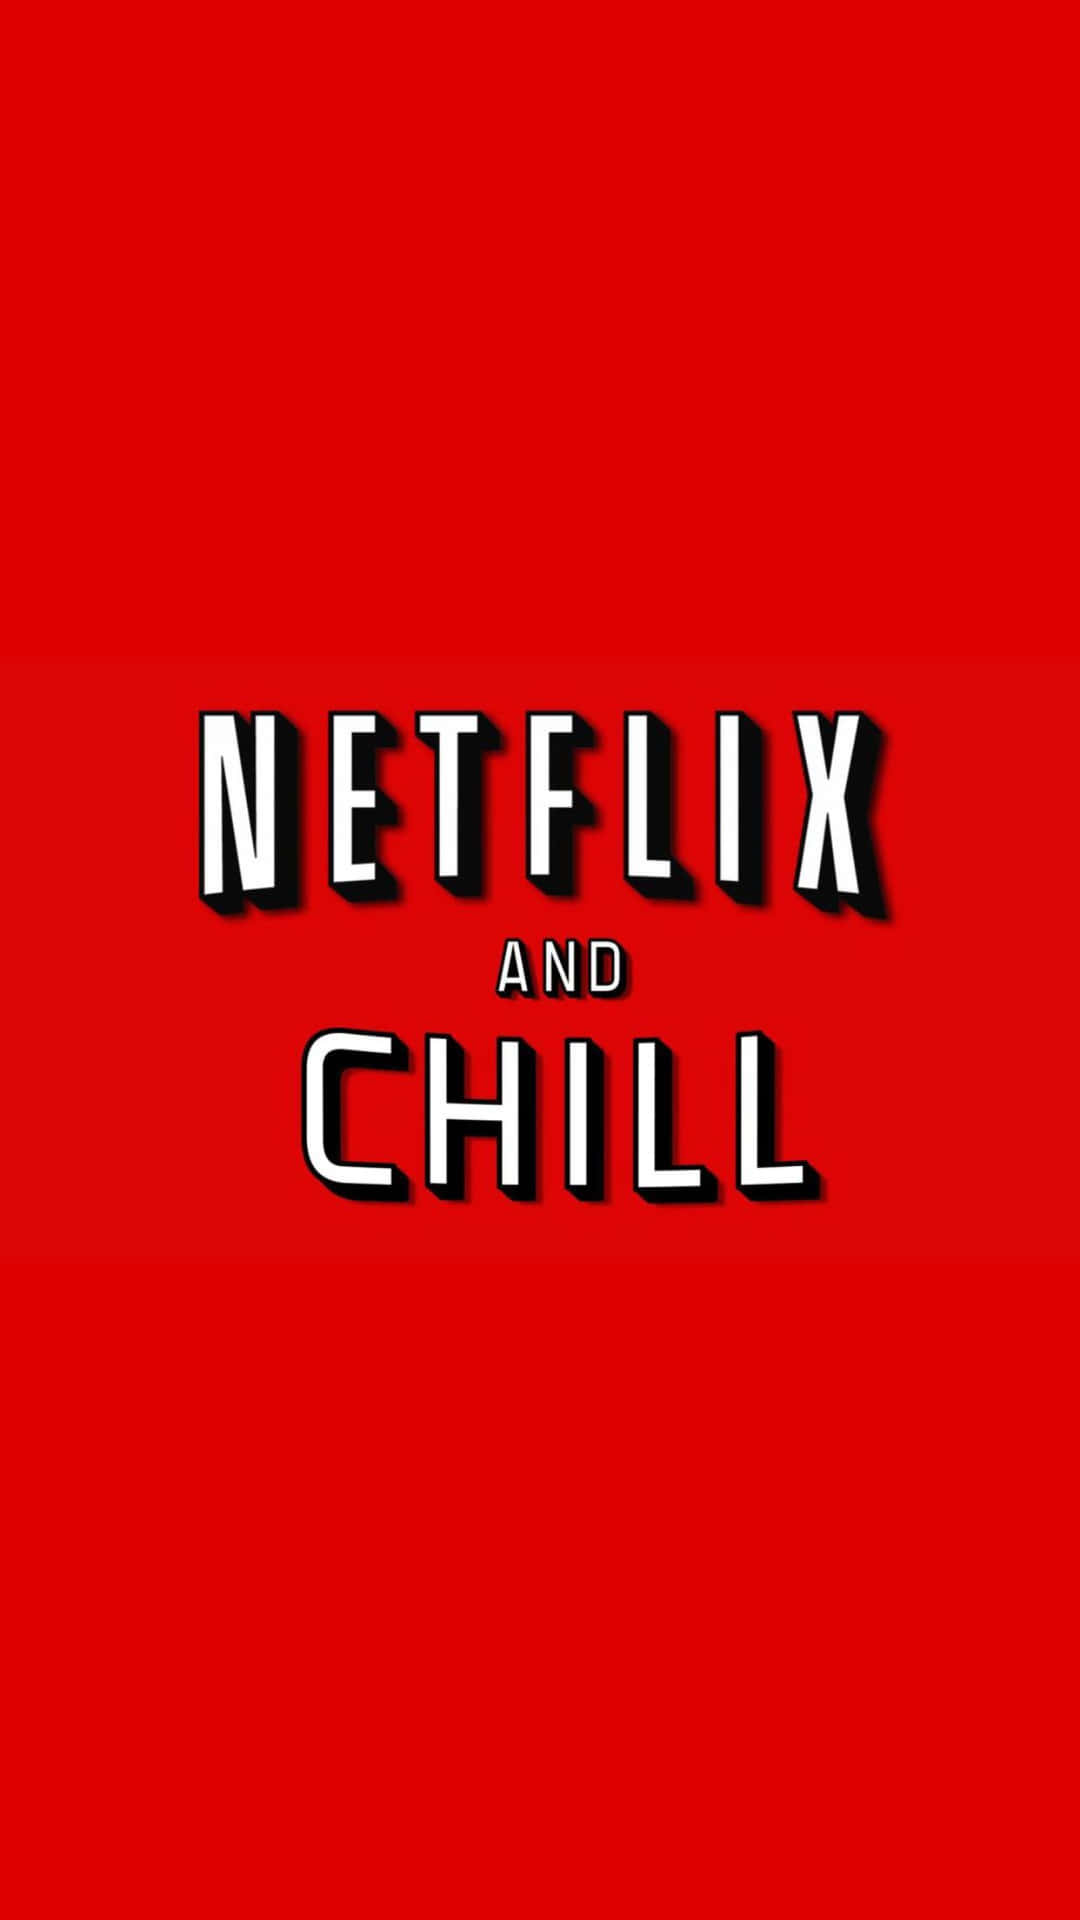 Netflix And Chill Aesthetic Background